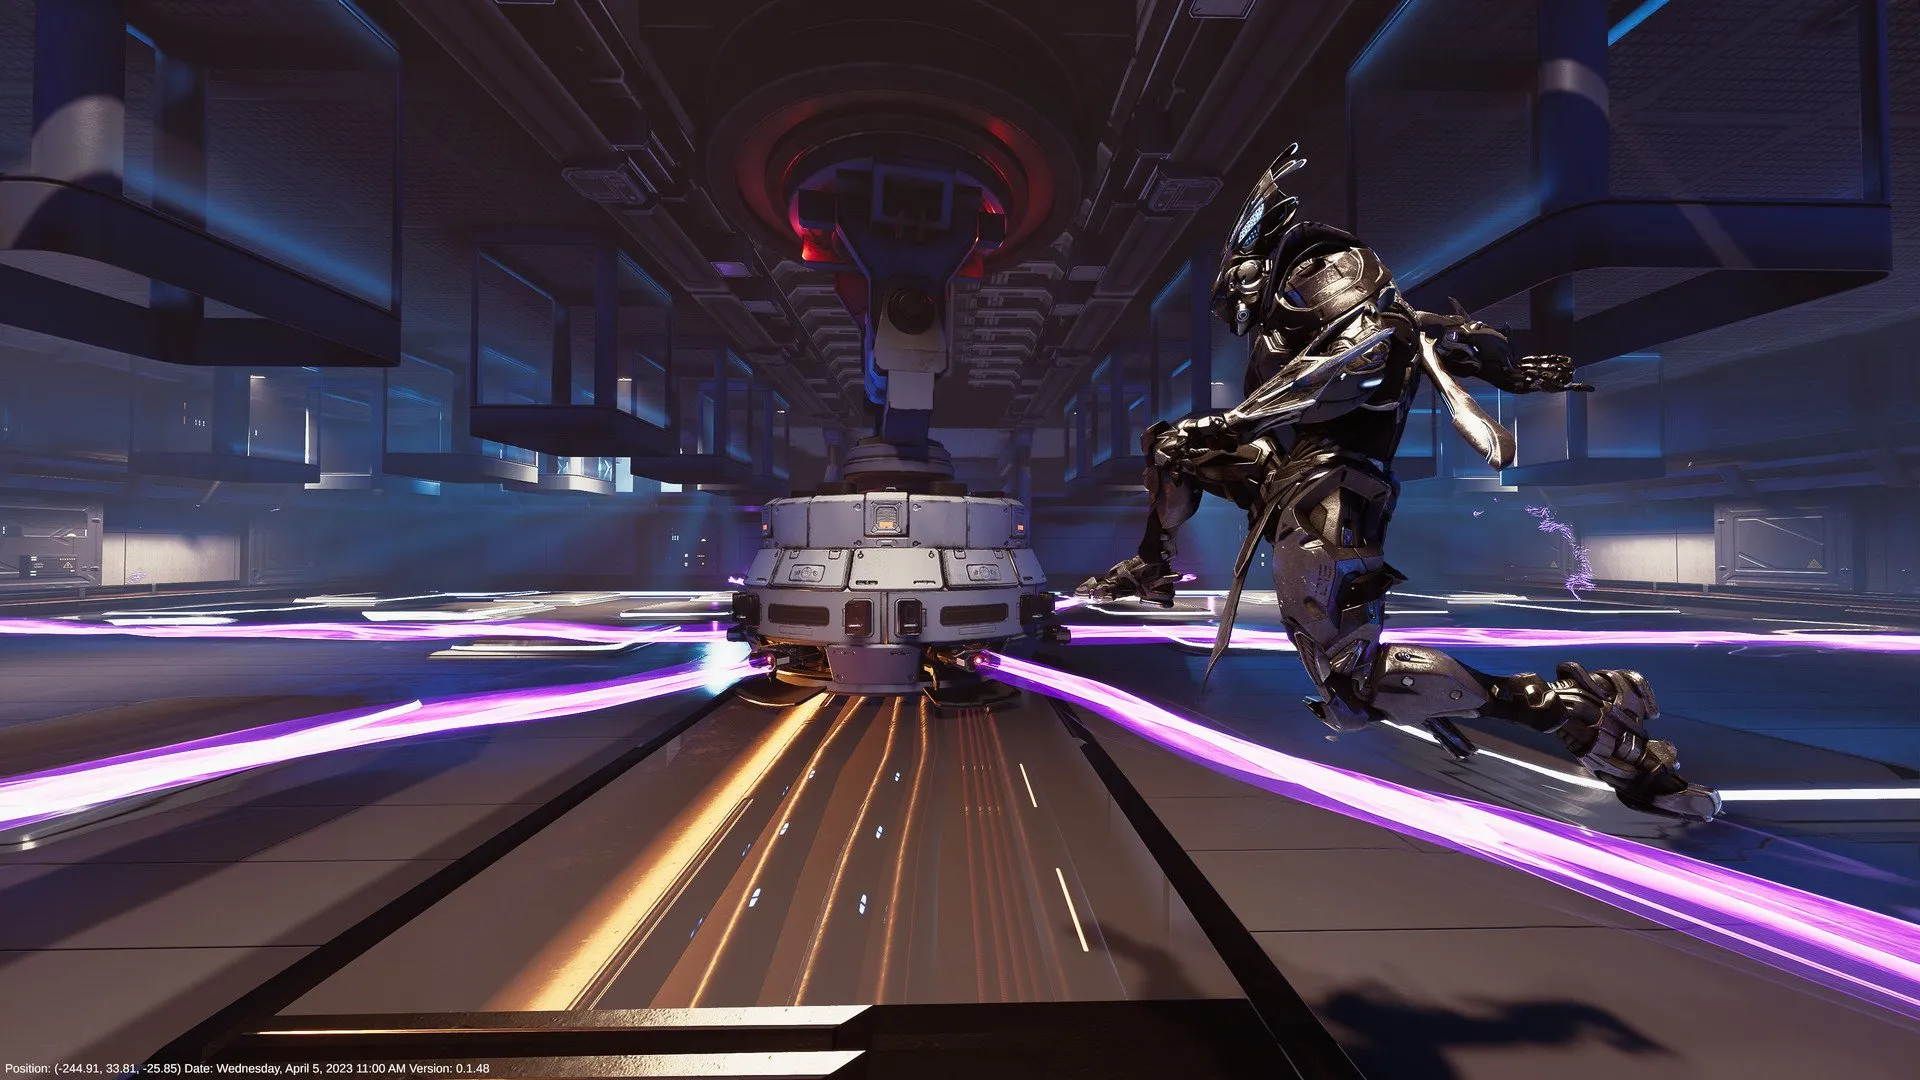 Screenshot from Proving Grounds showing Reyu jumping over purple lasers in scifi dystopian warehouse environment.